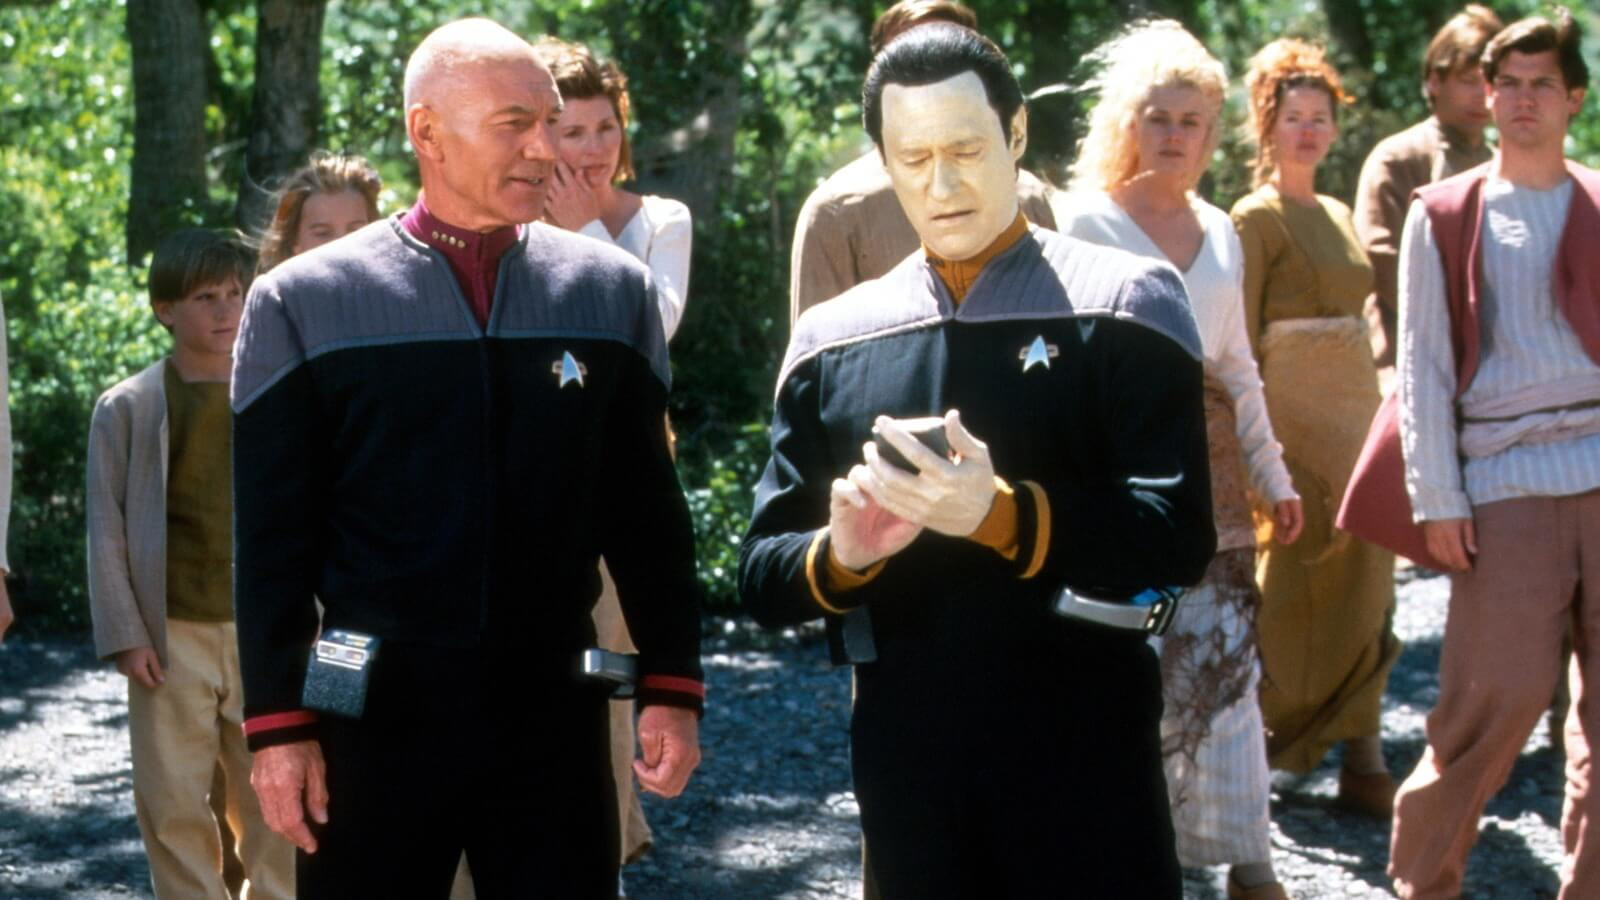 Data with Picard in Star Trek